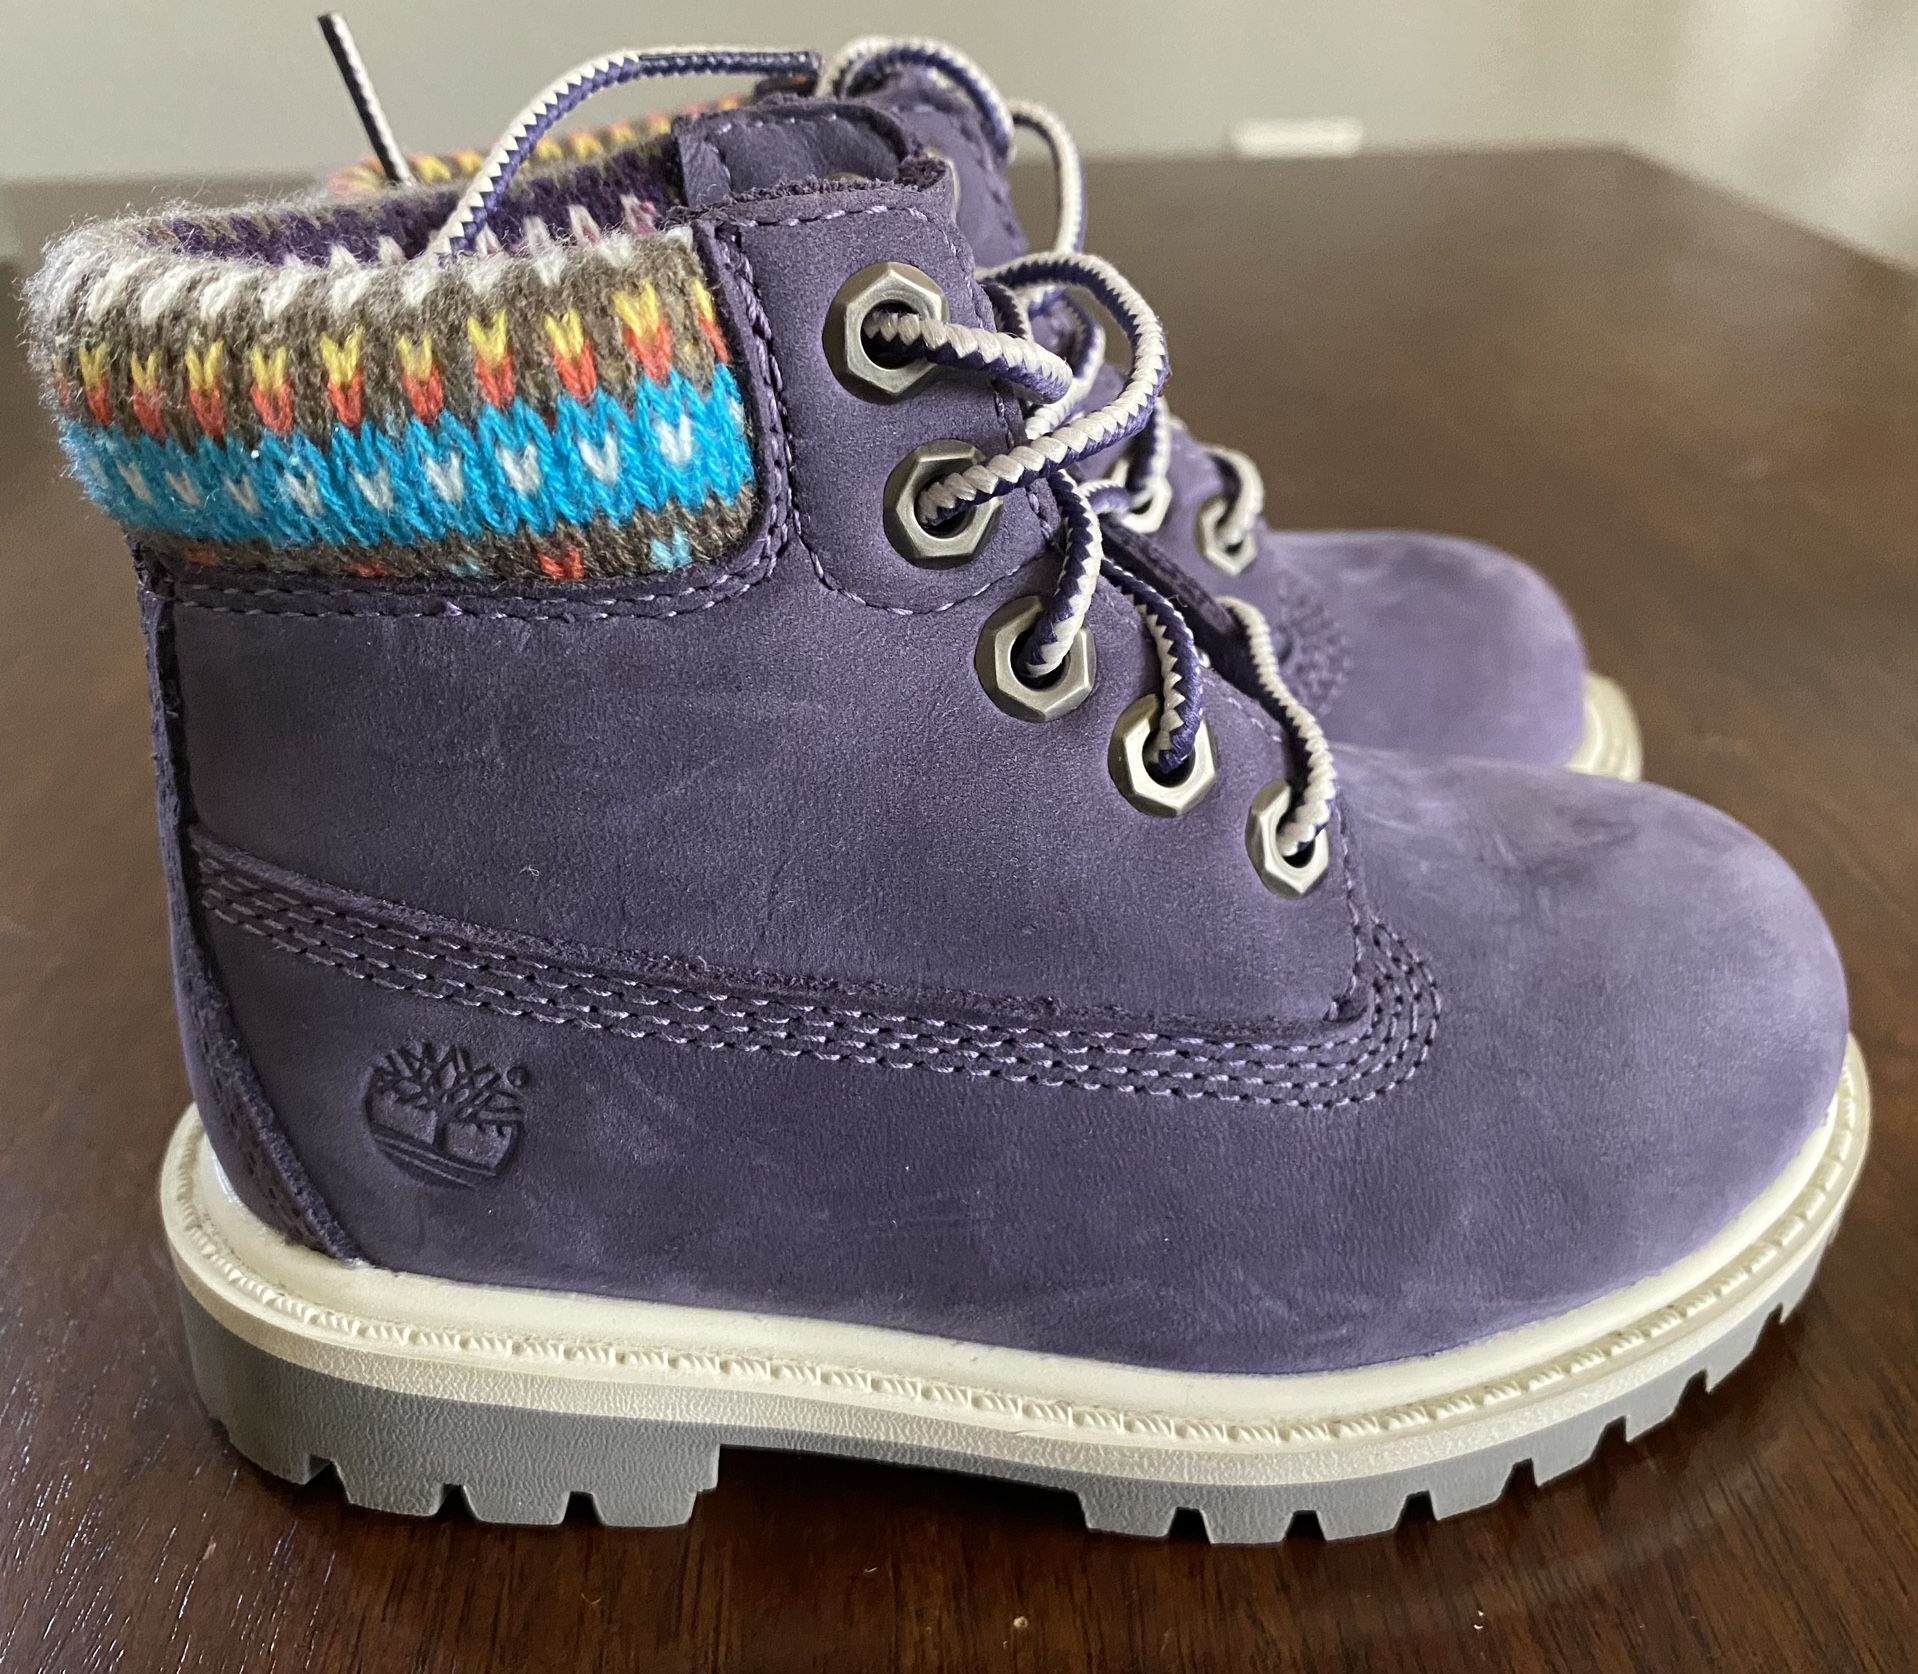 Purple Timberlands, size 7 toddlers